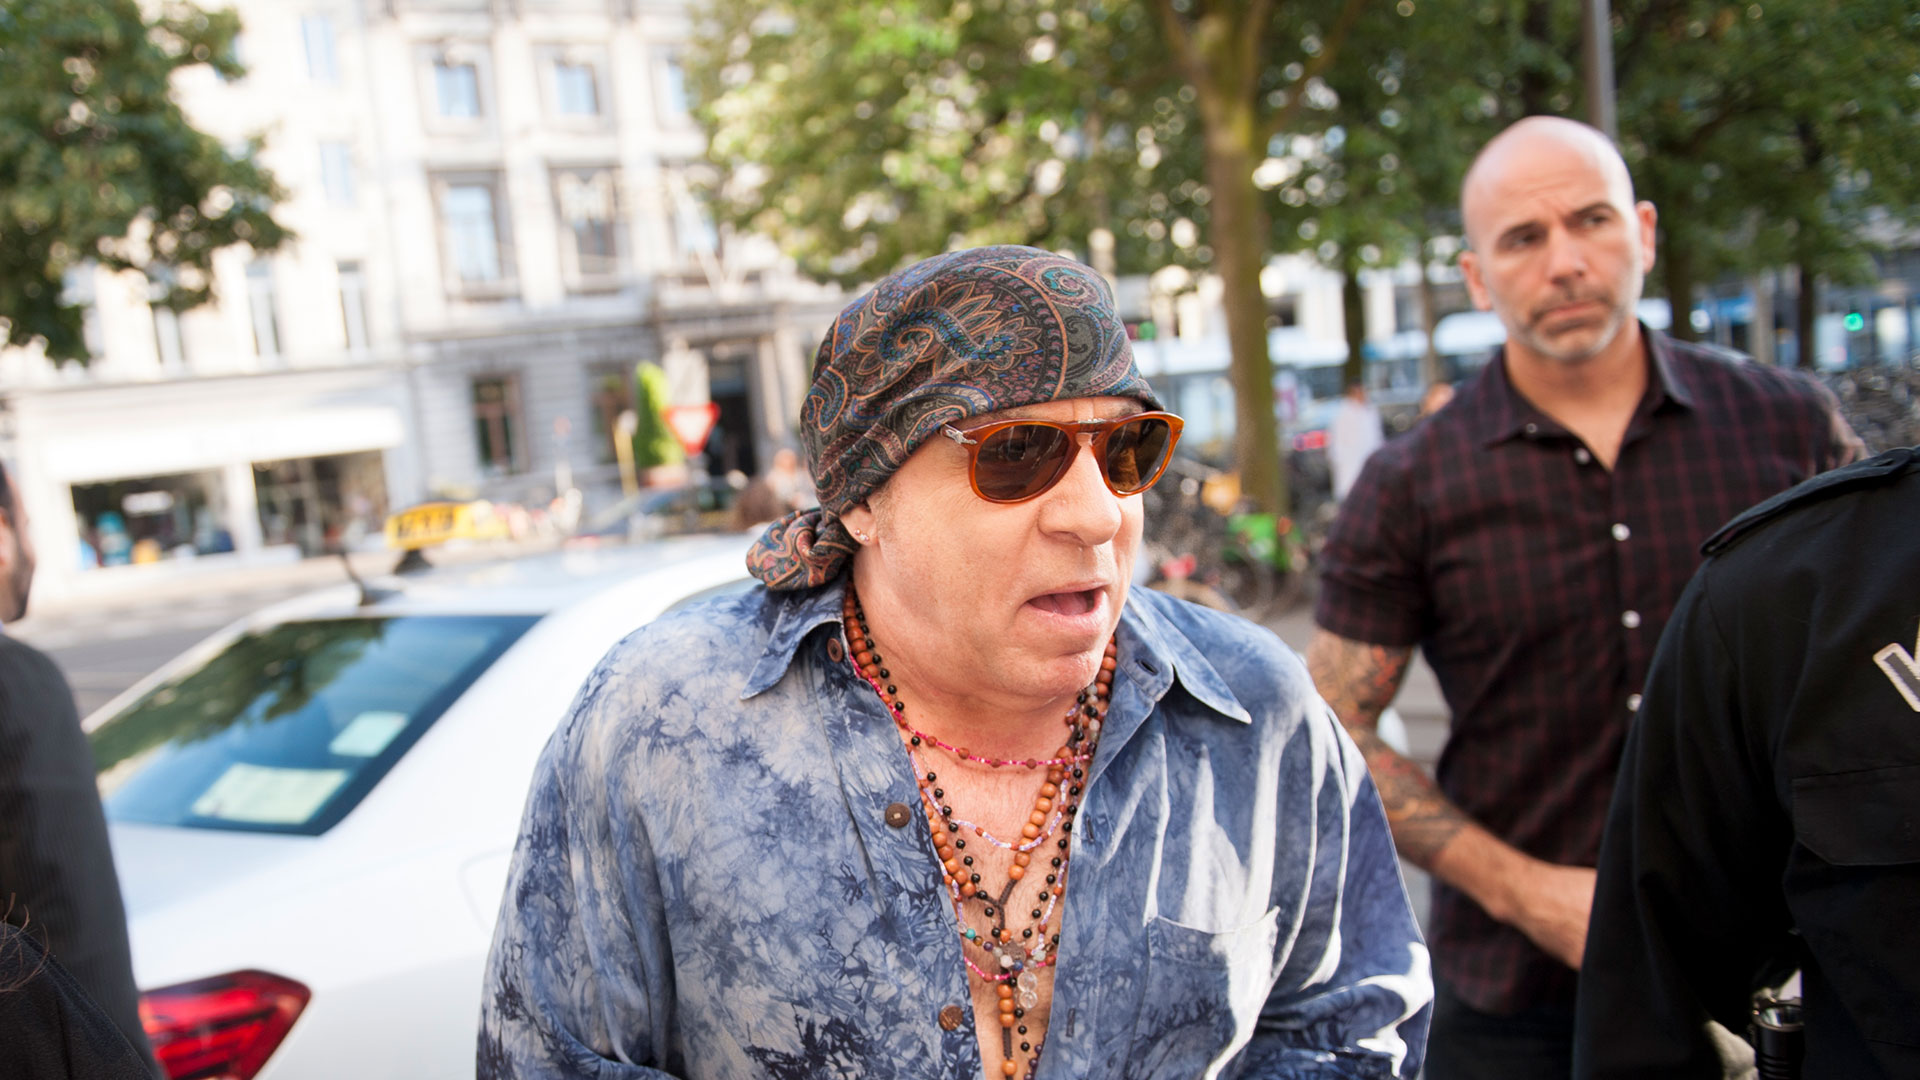 Five things we learned from E Street Band legend Steven Van Zandt The